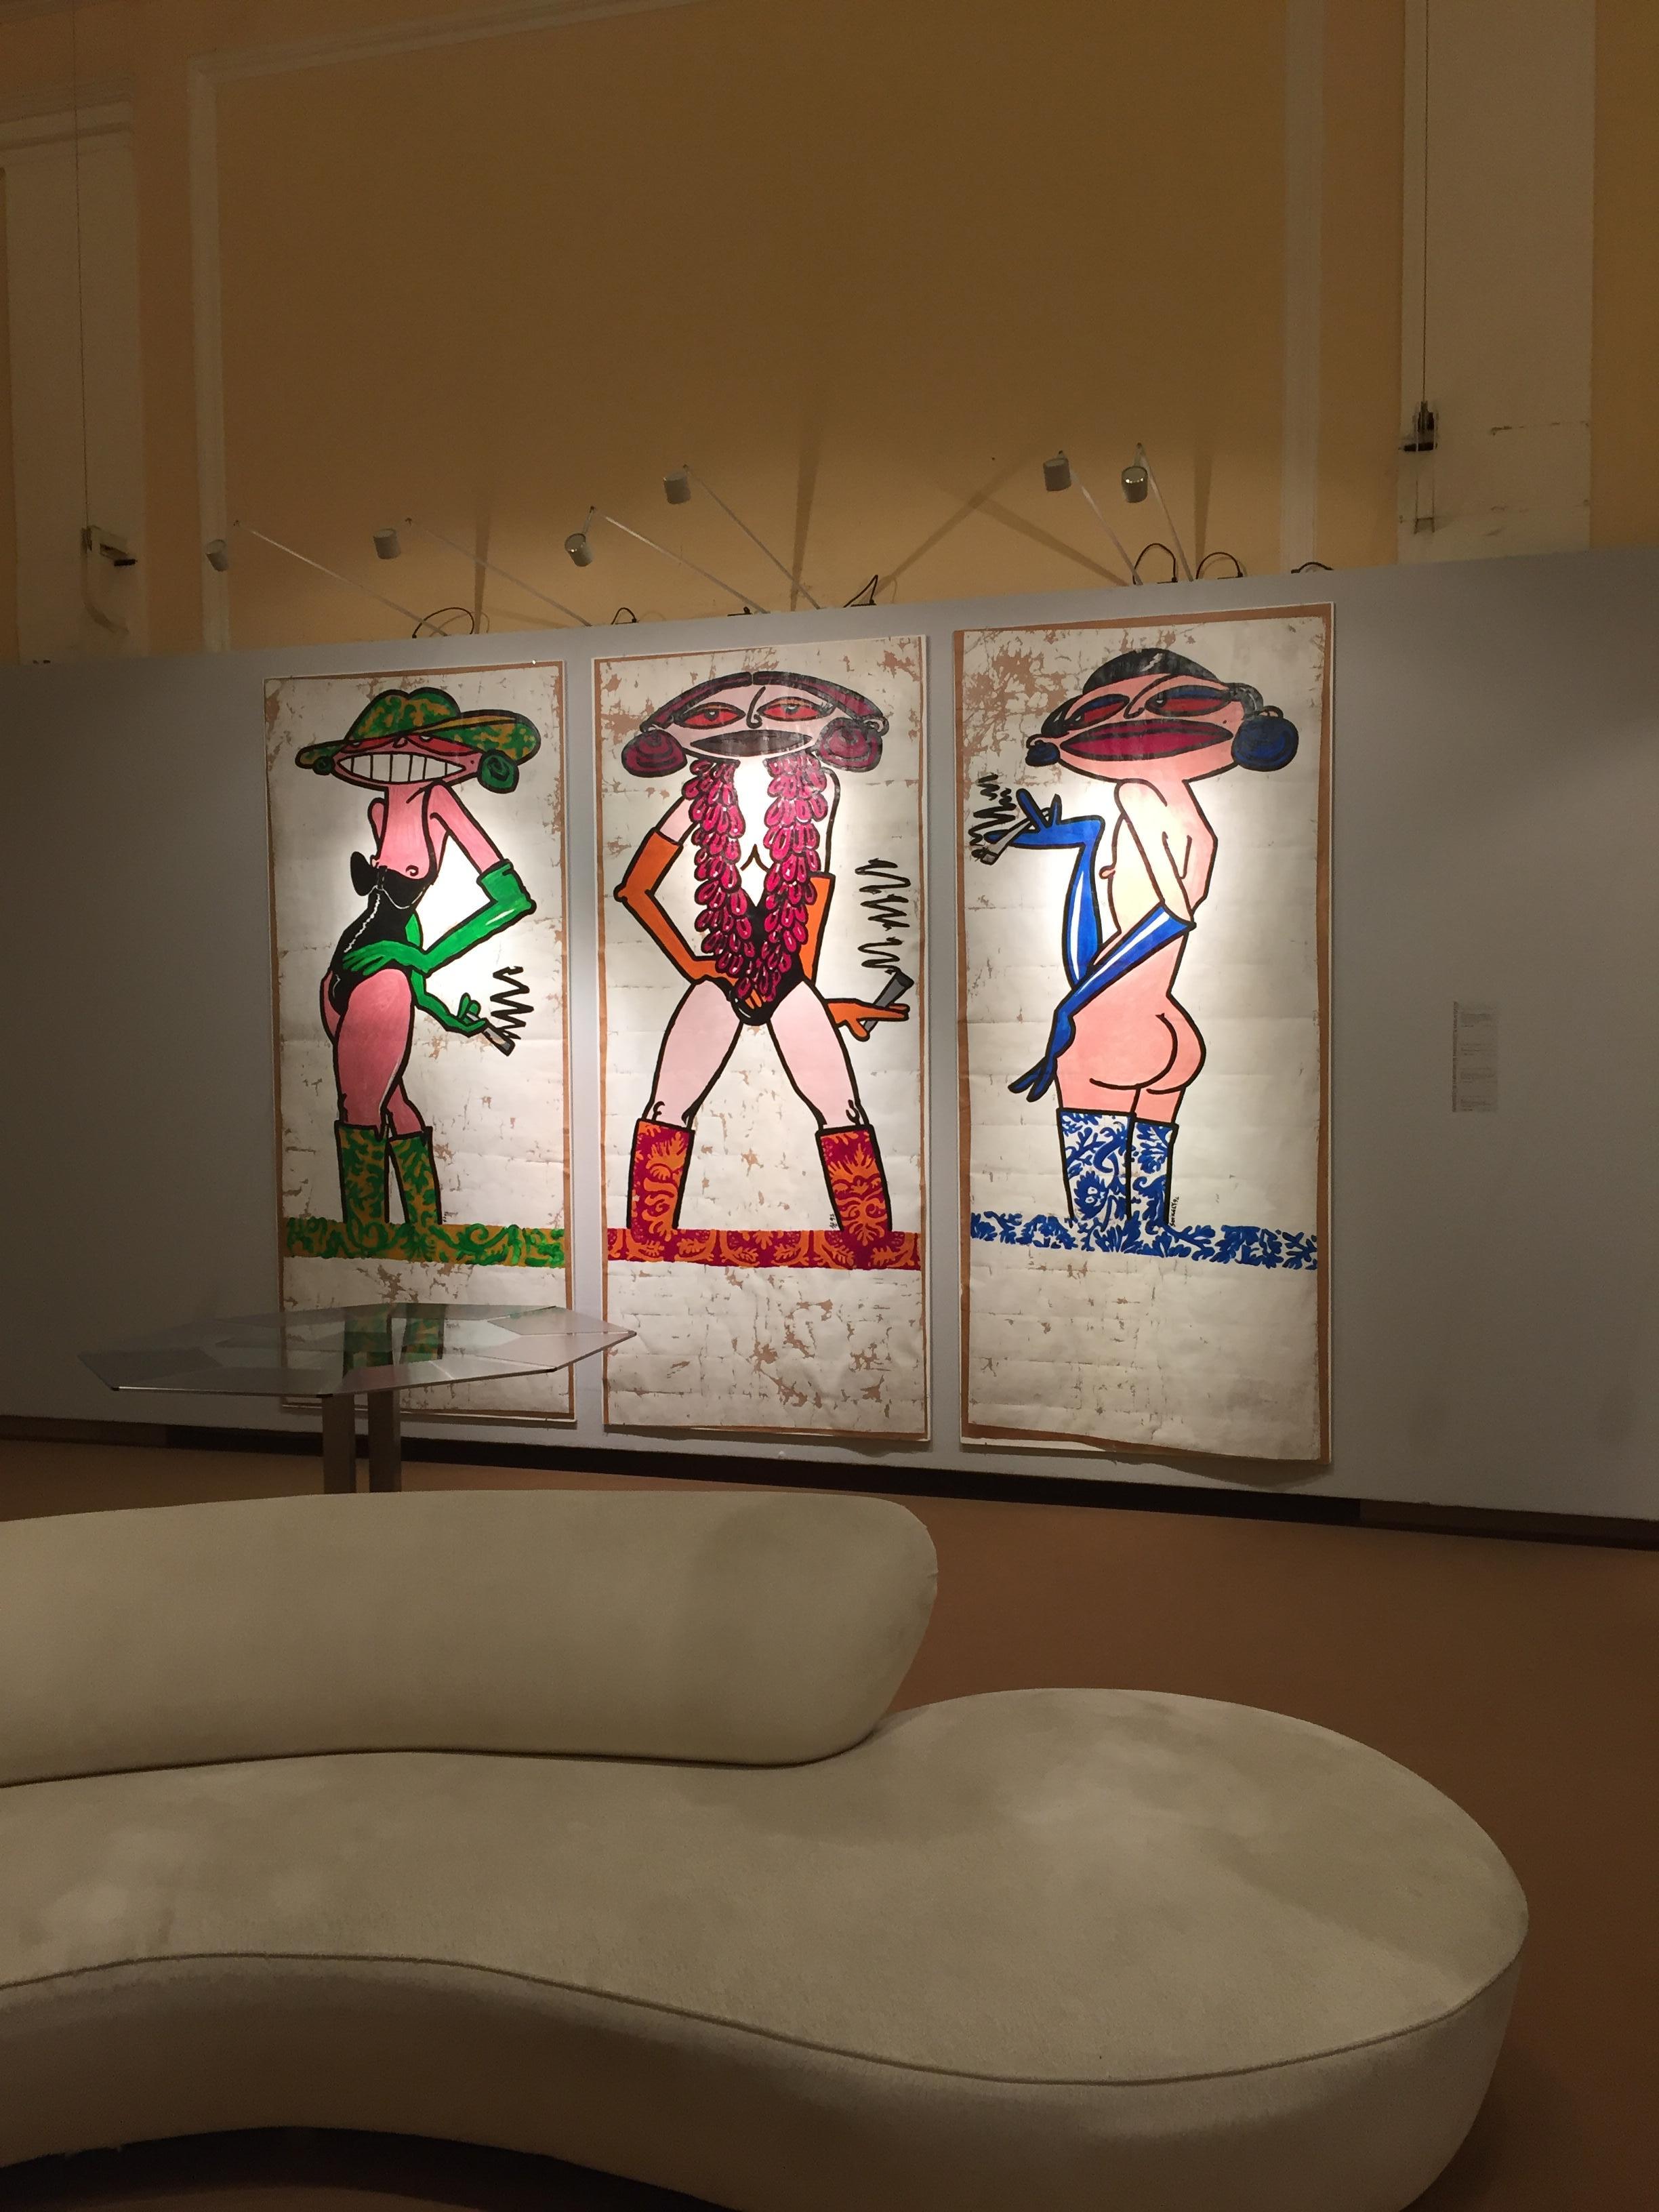 Three single paintings, mixed technique on paper, signed and dated P. Szekely 92, made on the occasion of a presentation of Emilio Pucci fabrics in the Woka Showrooms together with Sotheby's, then also situated in the 